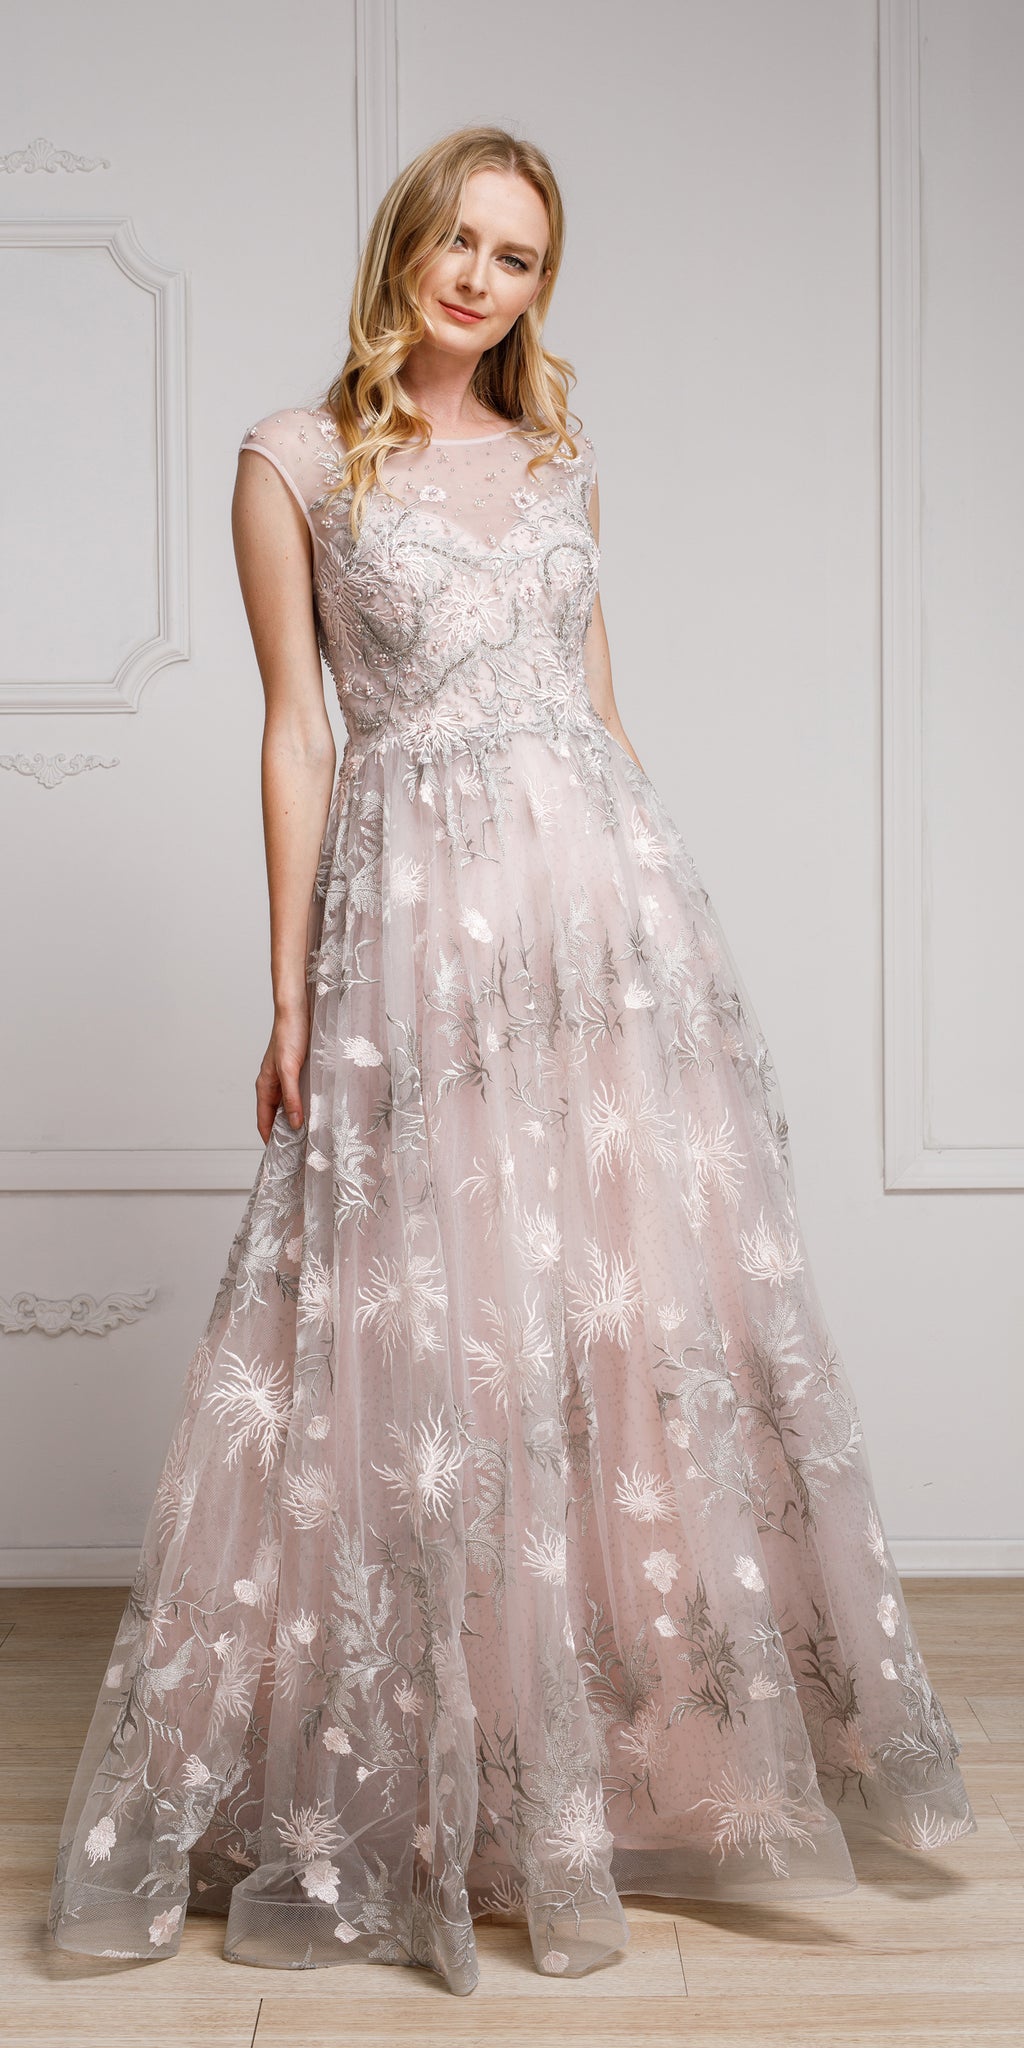 Main image of Floral & Embroidered Full Length Prom Gown